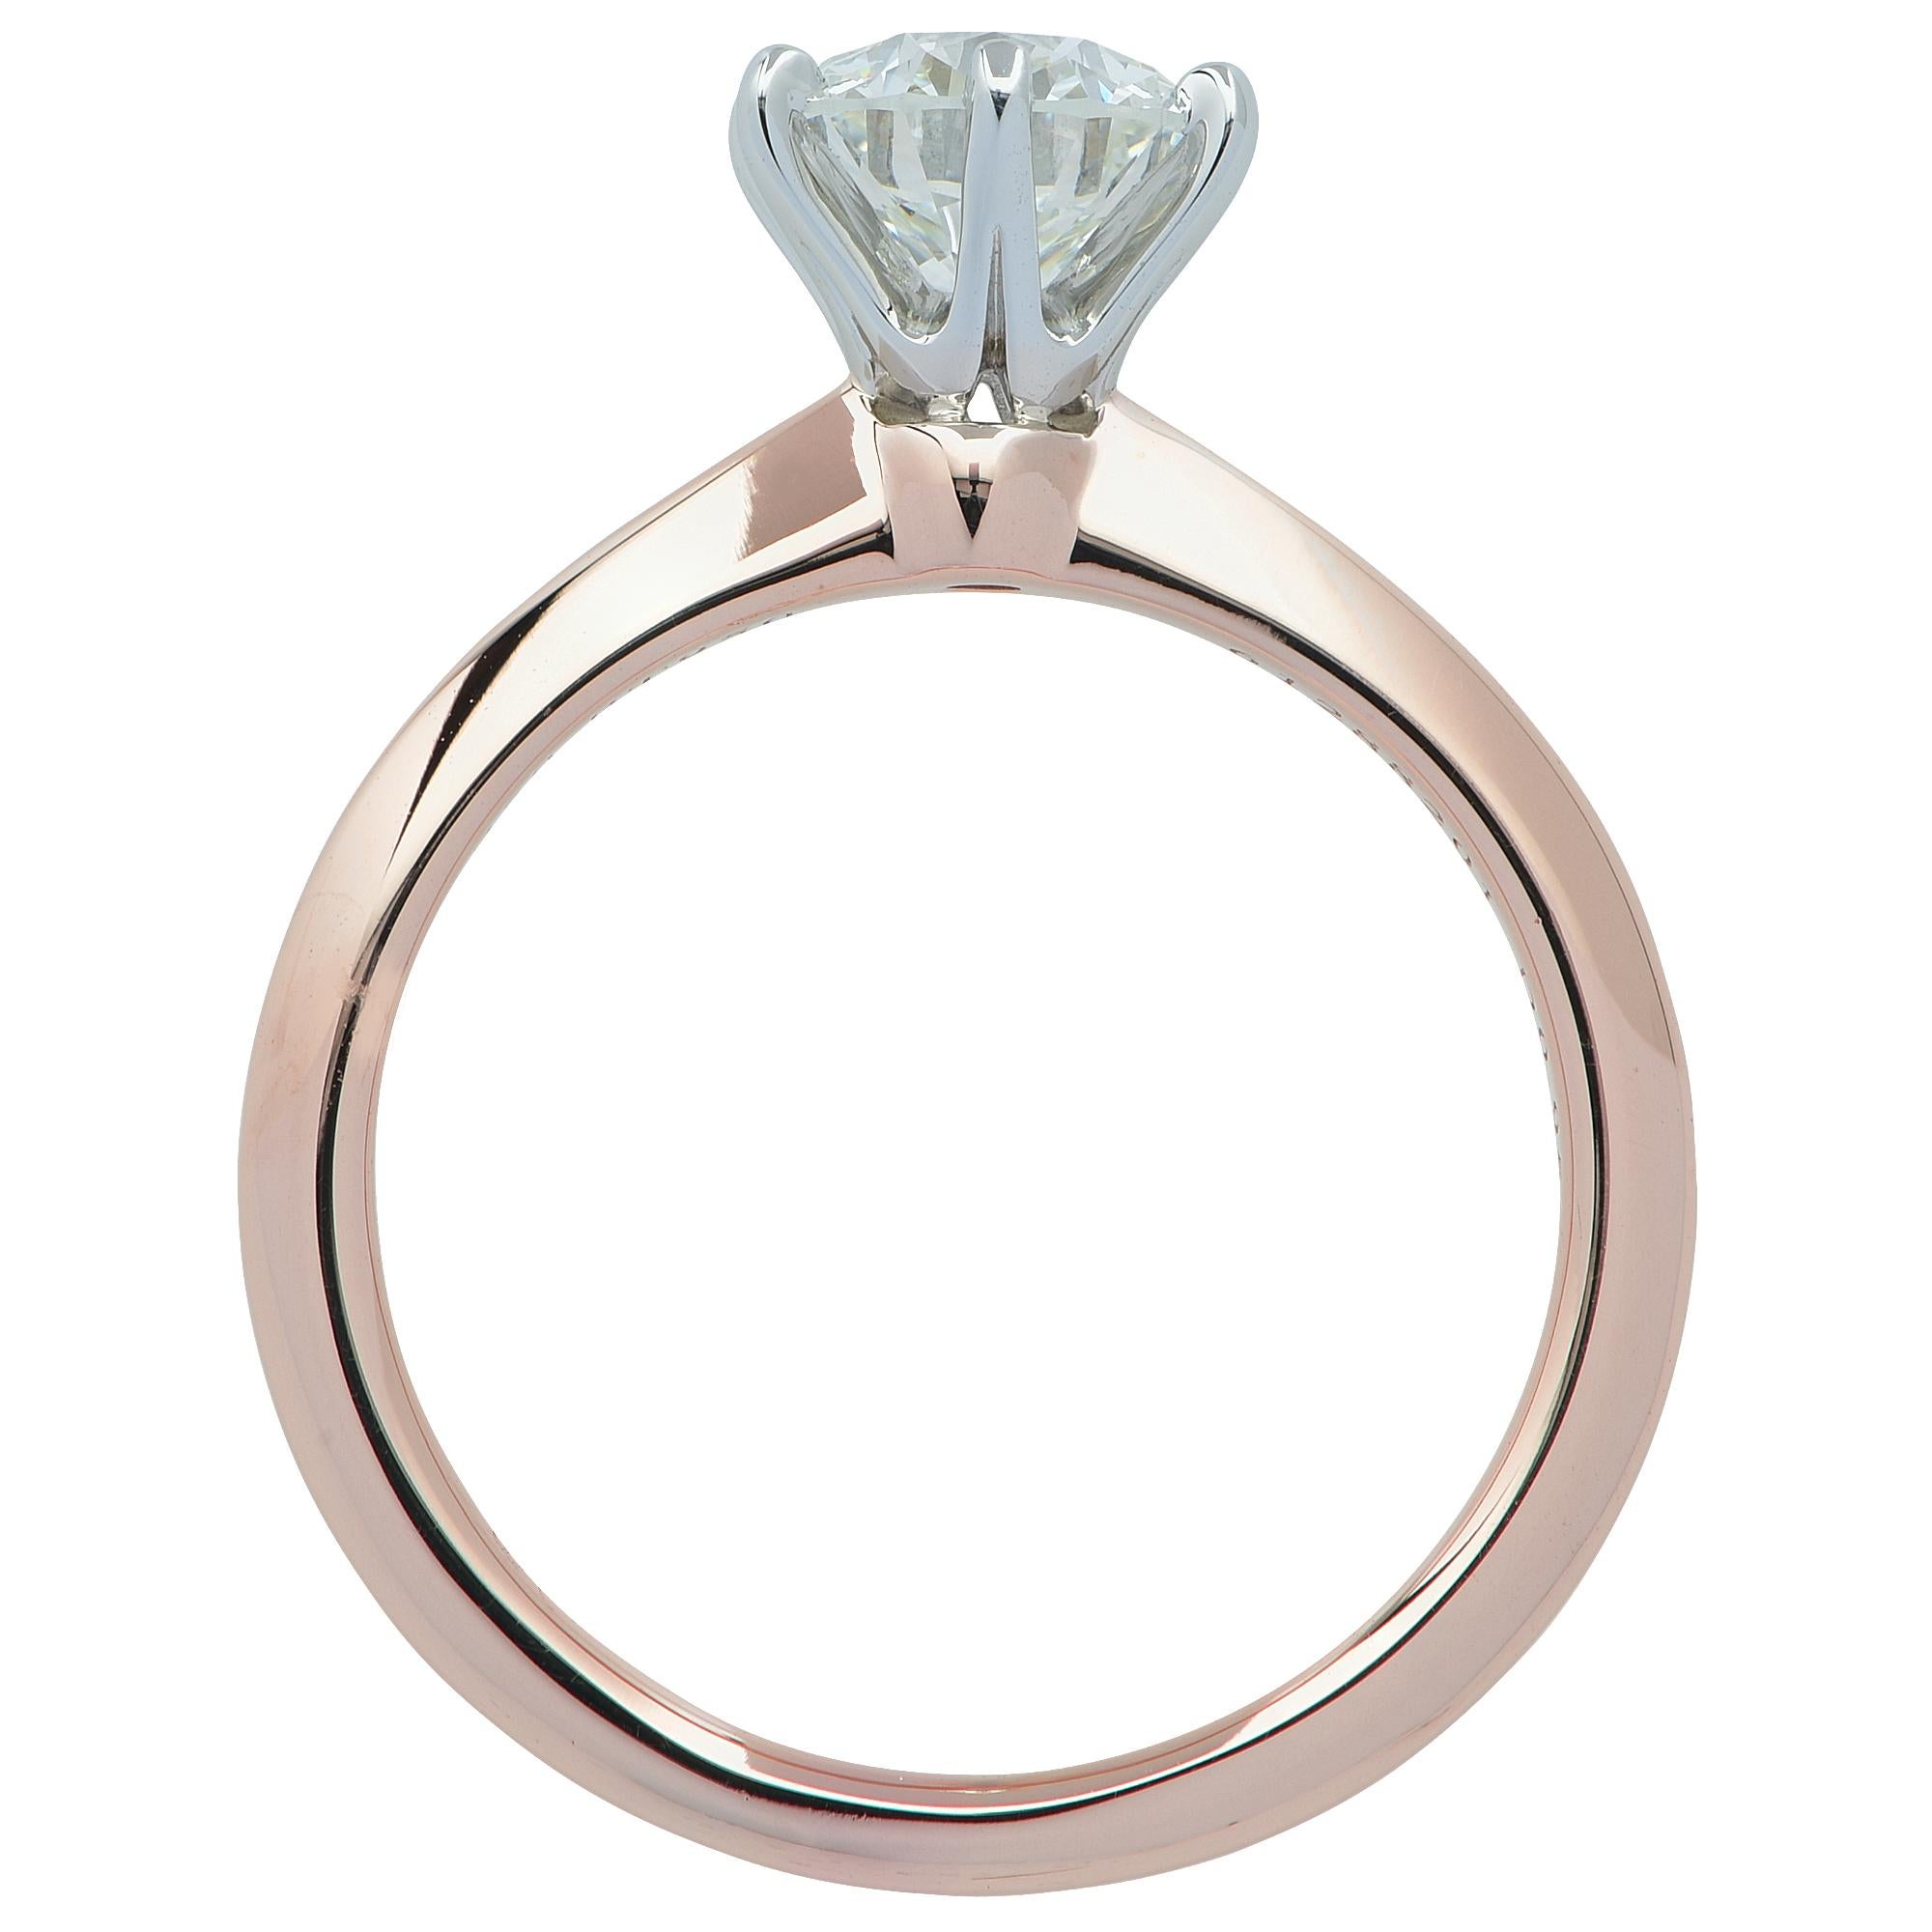 Elegant and timeless Tiffany & Co. engagement ring crafted in platinum and 18 karat rose gold featuring a .95 carat round brilliant cut diamond H color, VS1 clarity. This classic Tiffany & Co. ring is accompanied by original Tiffany & Co. paper work